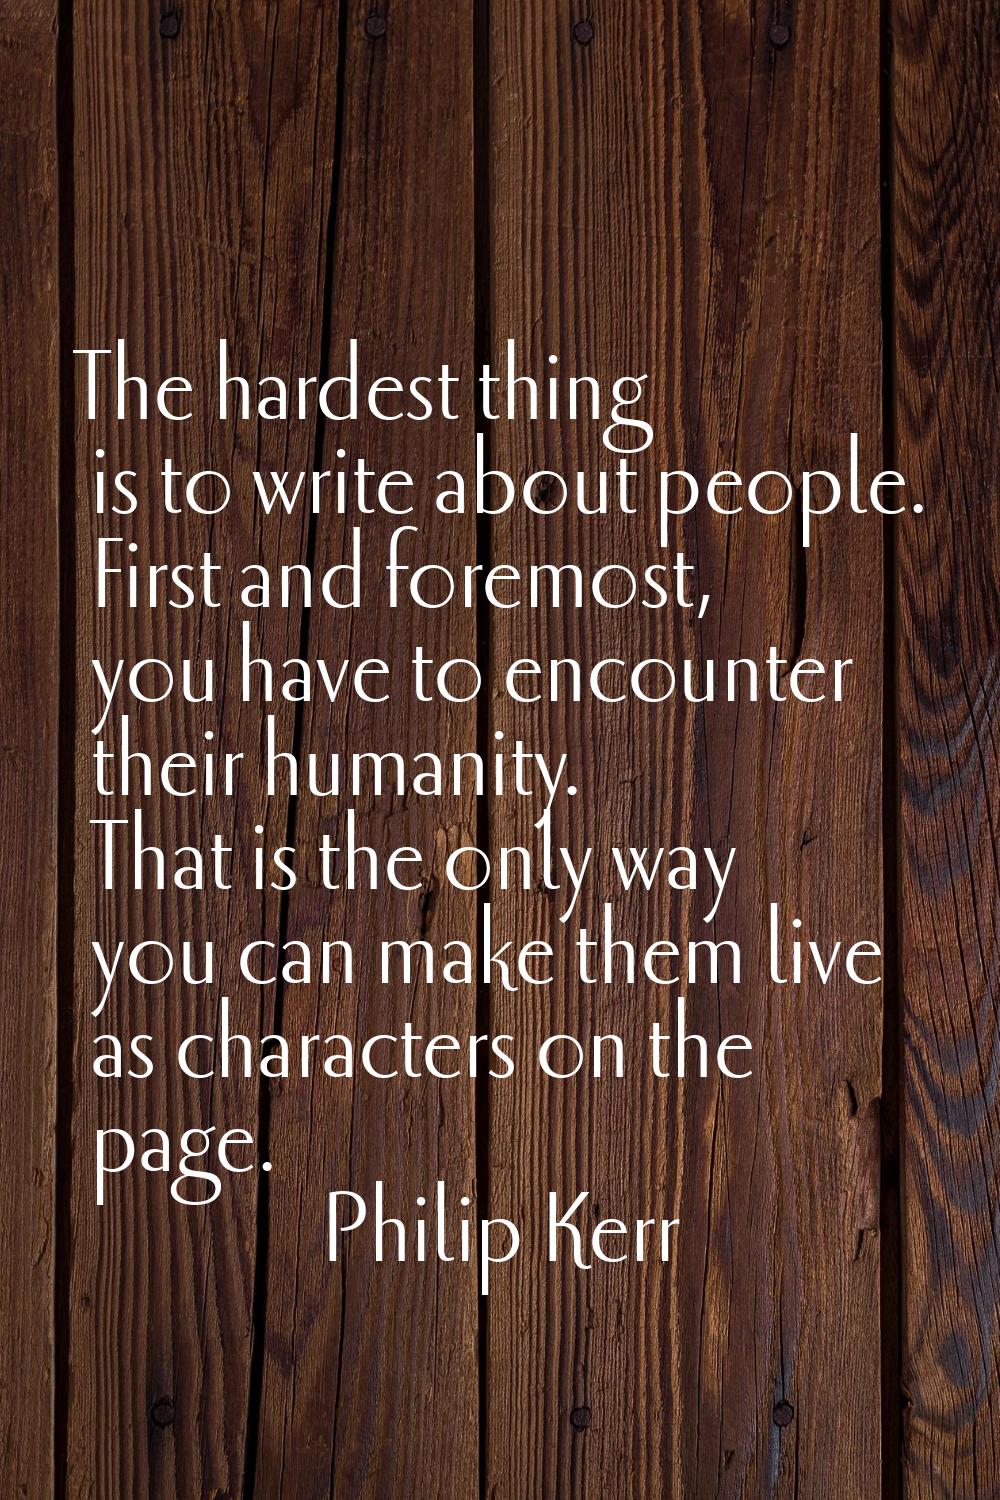 The hardest thing is to write about people. First and foremost, you have to encounter their humanit